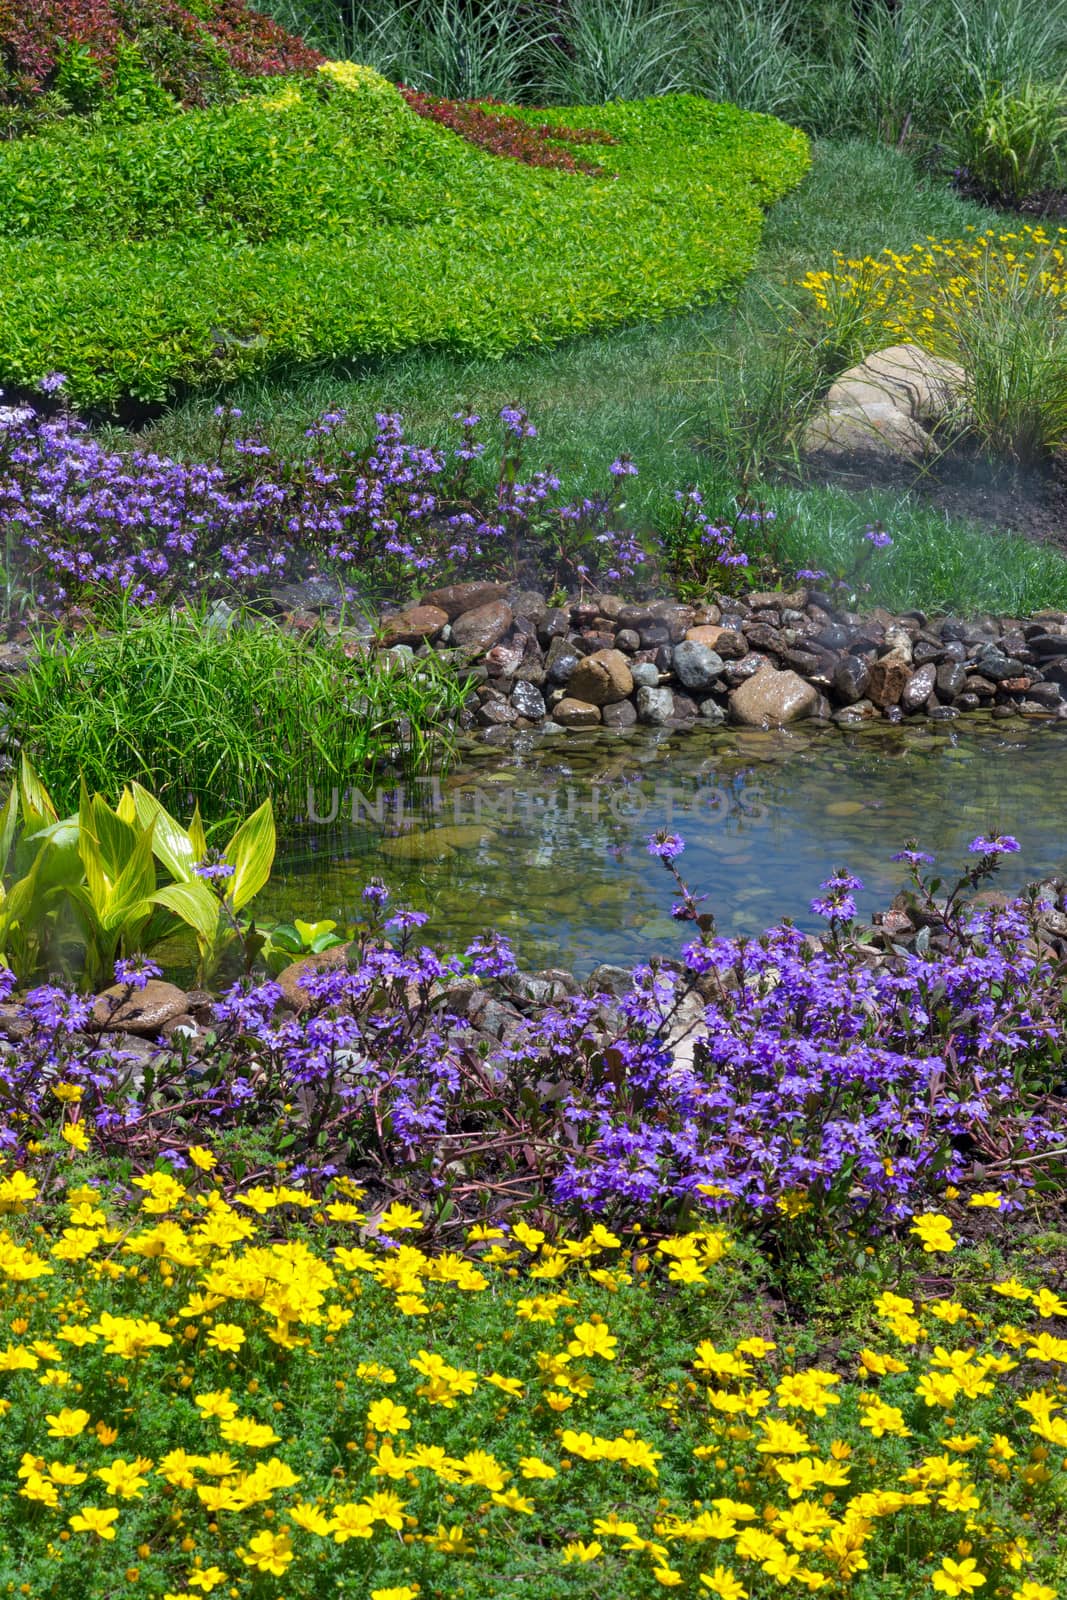 Beautifully landscaped garden with stones, water and a variety of flowers.